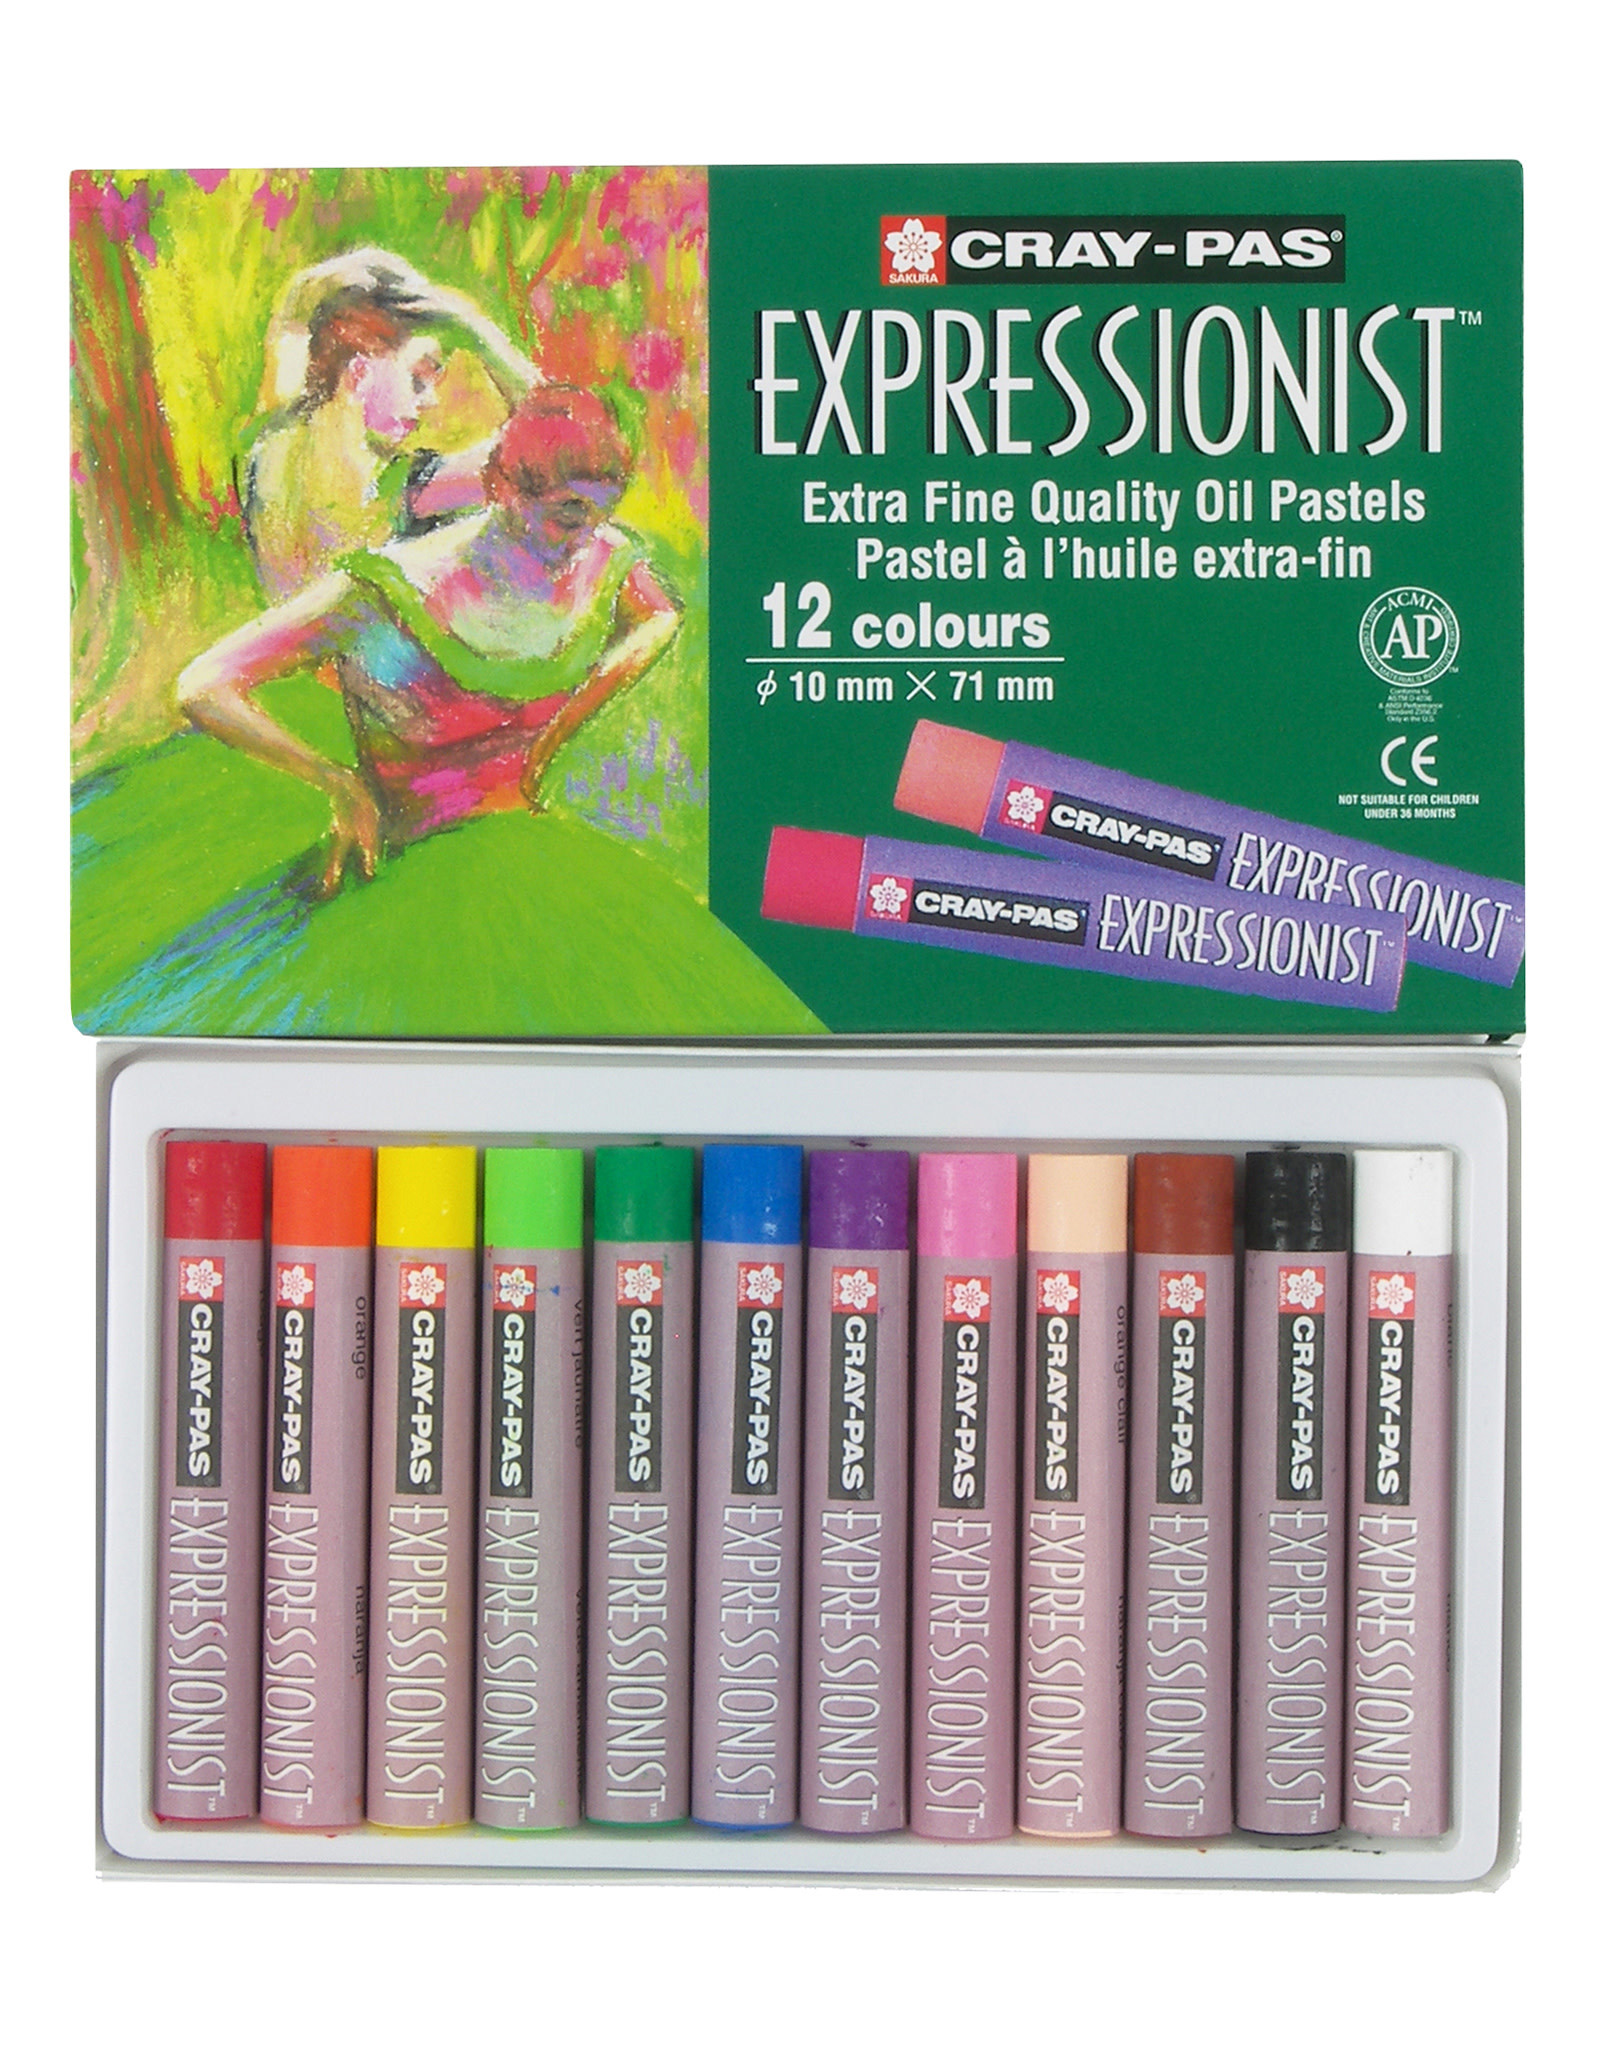 Oil Pastels - The Art Store/Commercial Art Supply